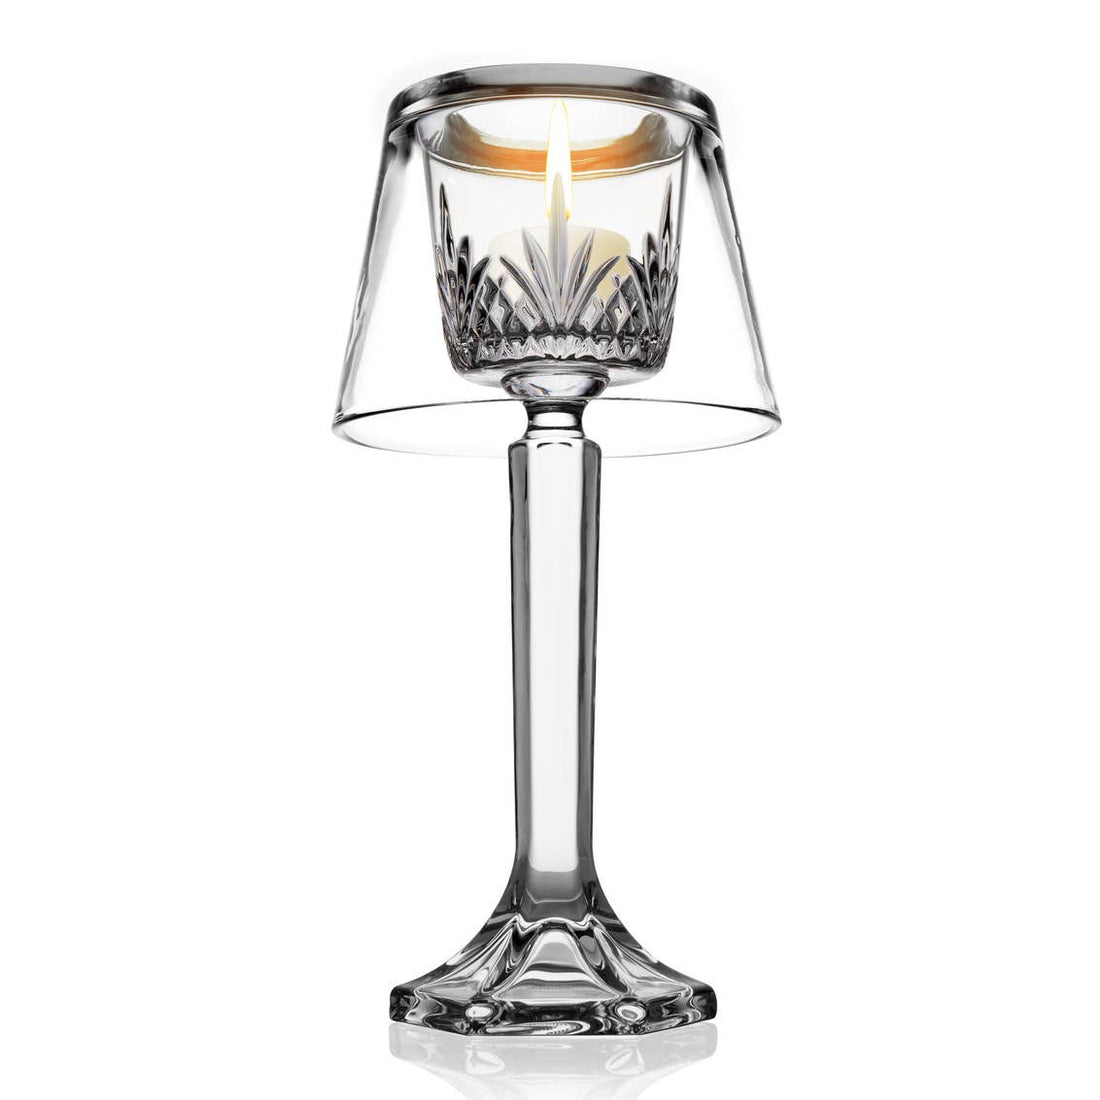 Clear Dublin Candle Holder Lamp by Godinger displayed in a sophisticated home decor setting.